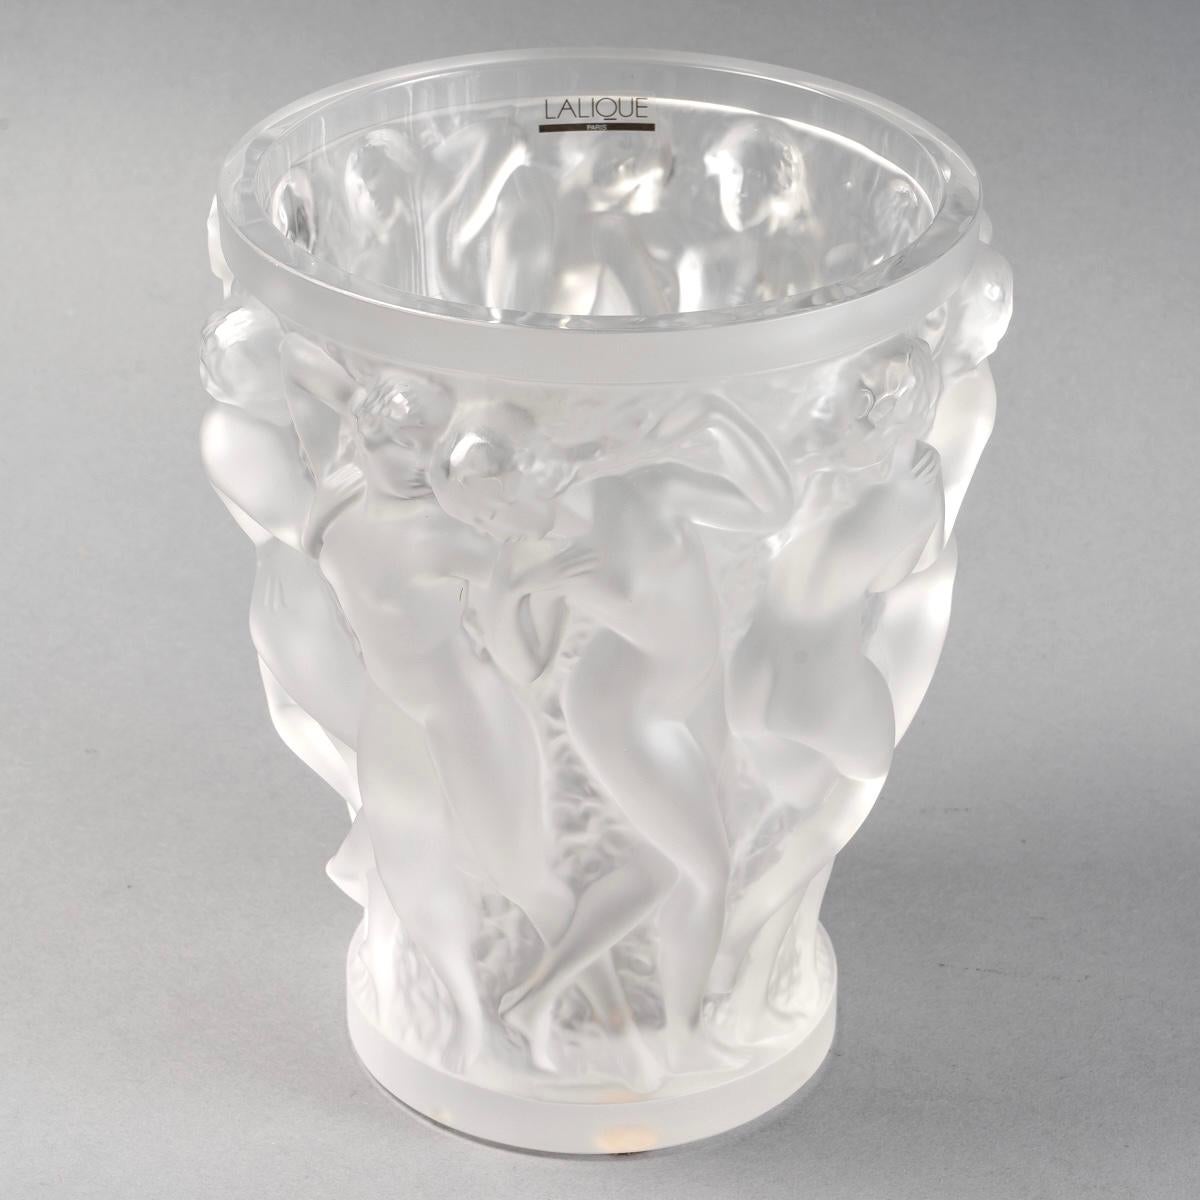 Art Deco Lalique France Vase Bacchantes in Frosted Crystal Dancing Women - NEW WITH TAG